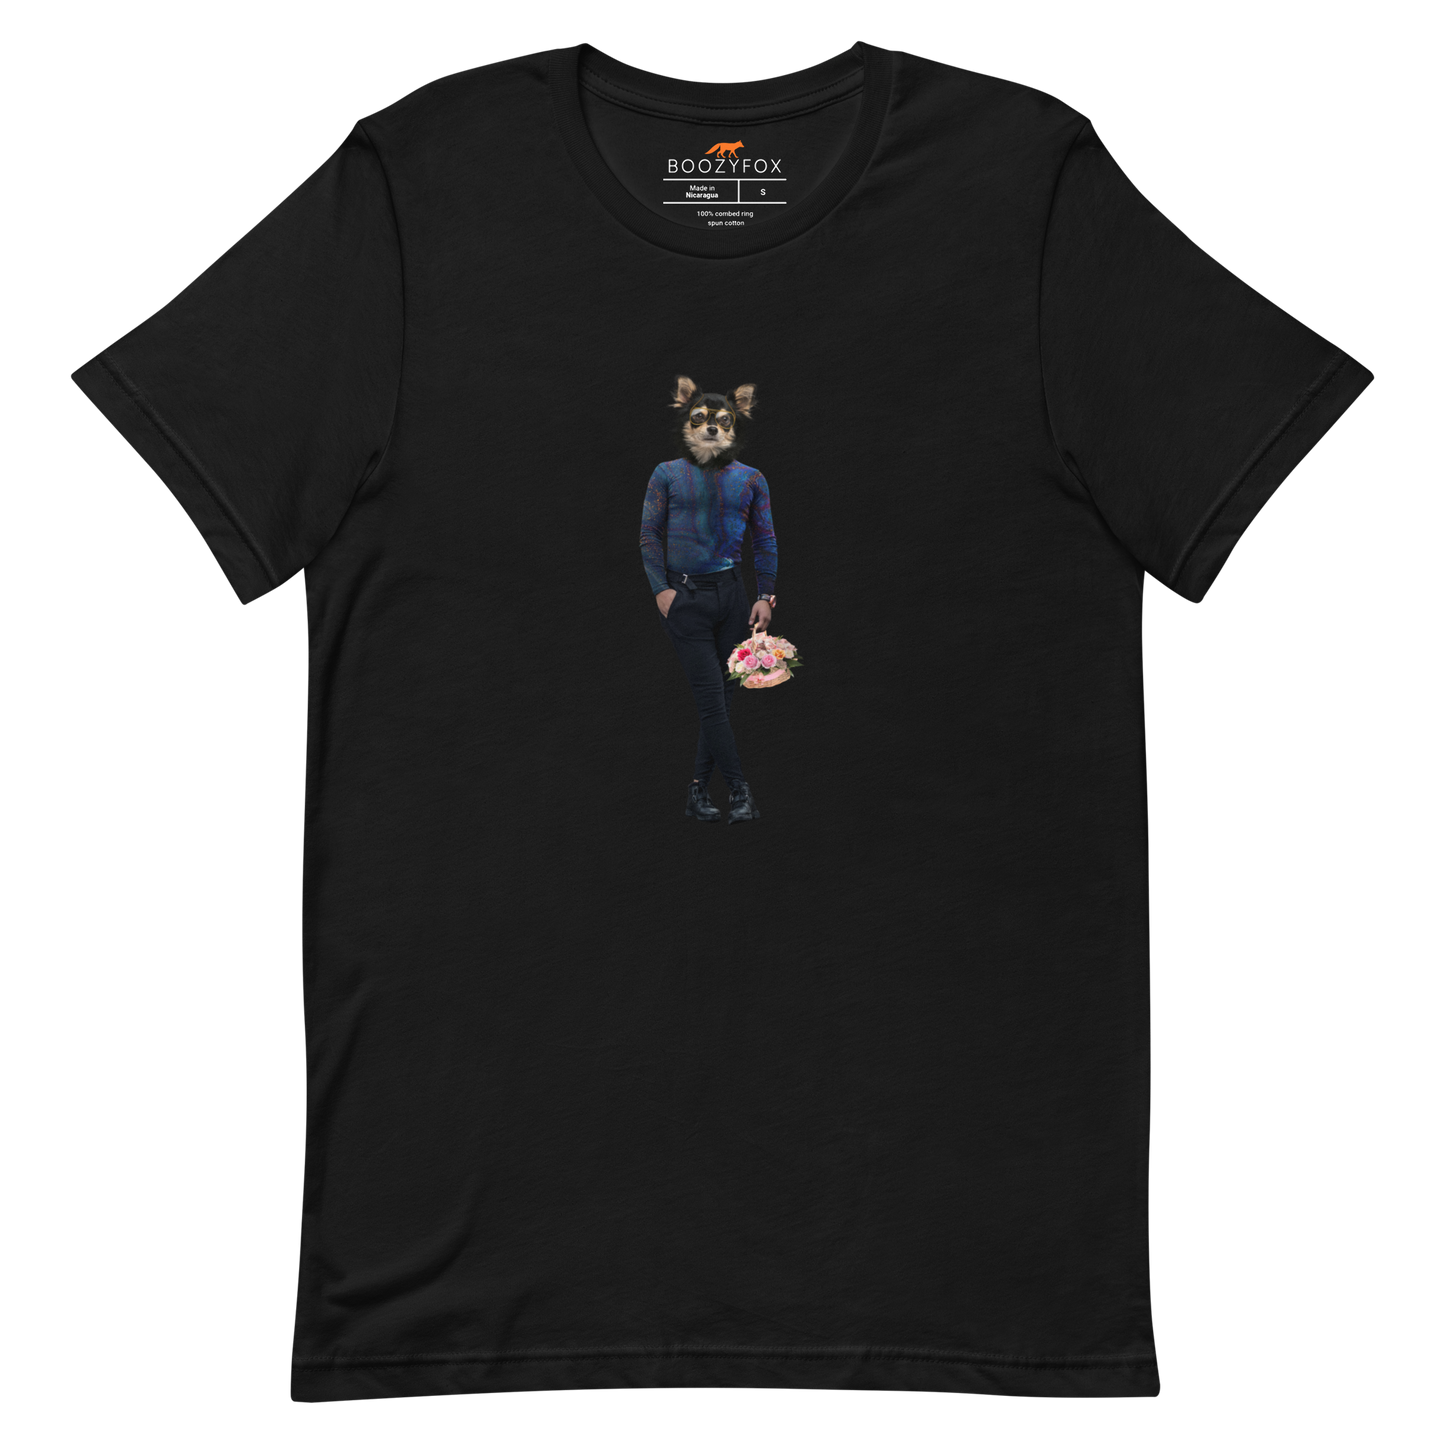 Black Premium Dog T-Shirt featuring an Anthropomorphic Dog graphic on the chest - Funny Graphic Dog Tees - Boozy Fox